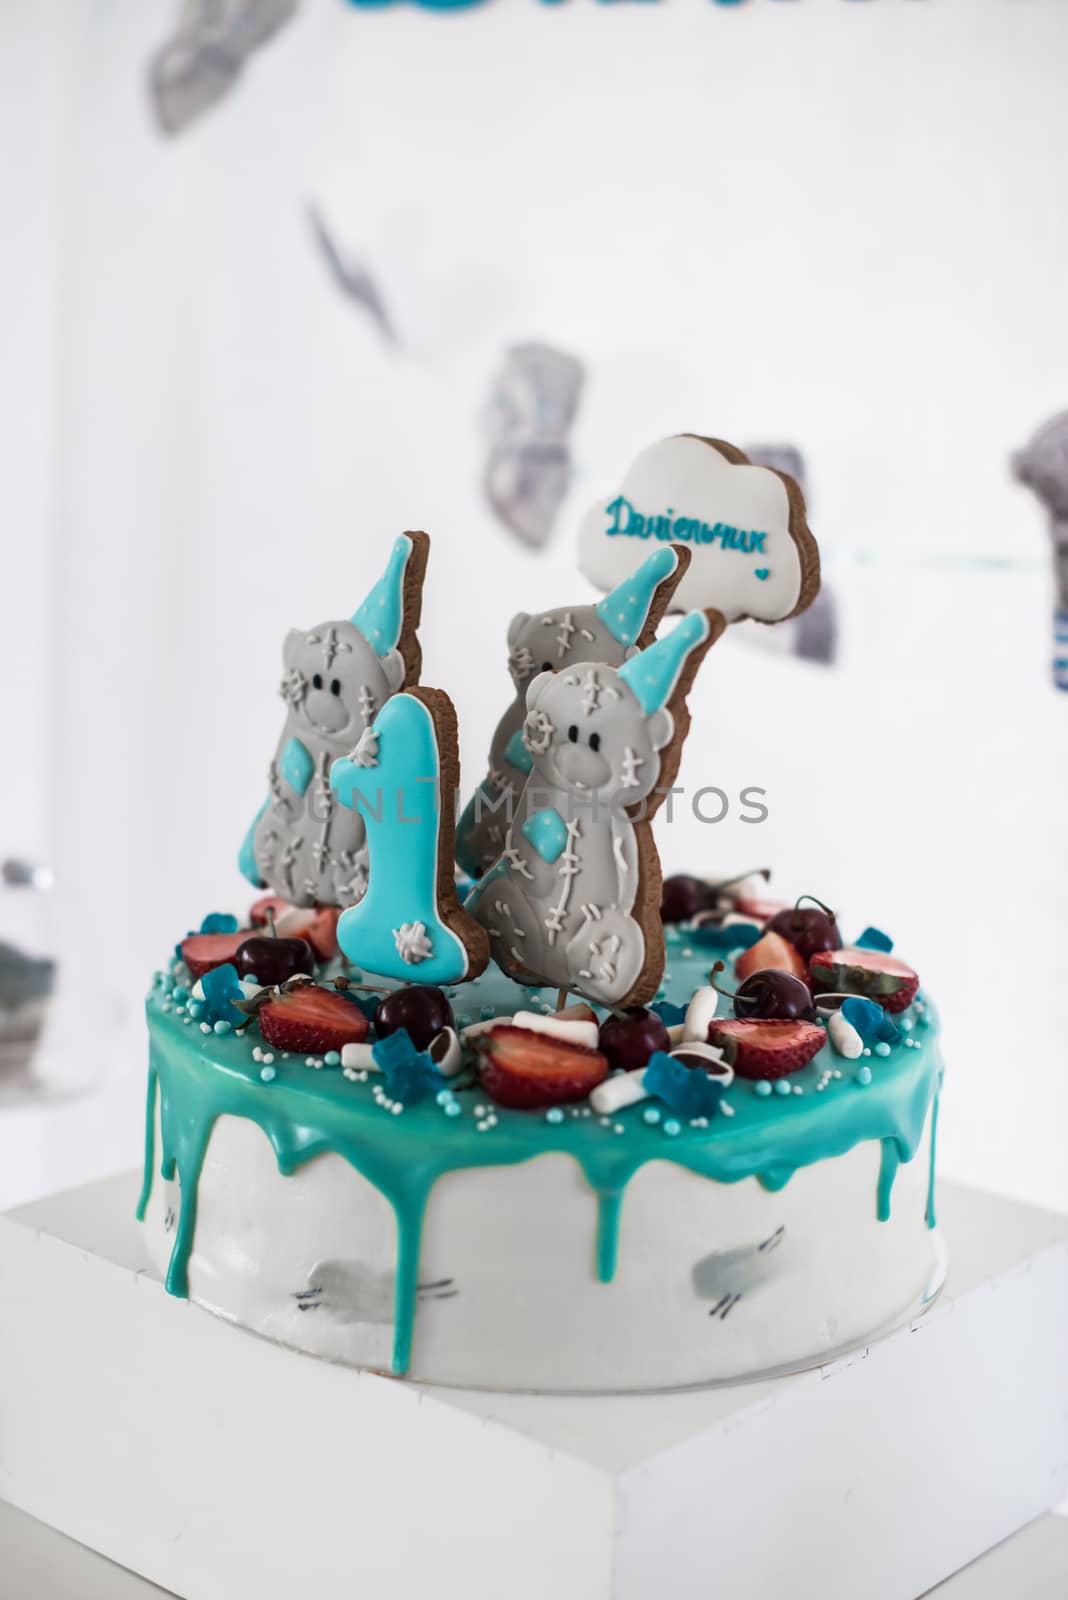 White cake decorated with blue fondant and cookies in the form of bears